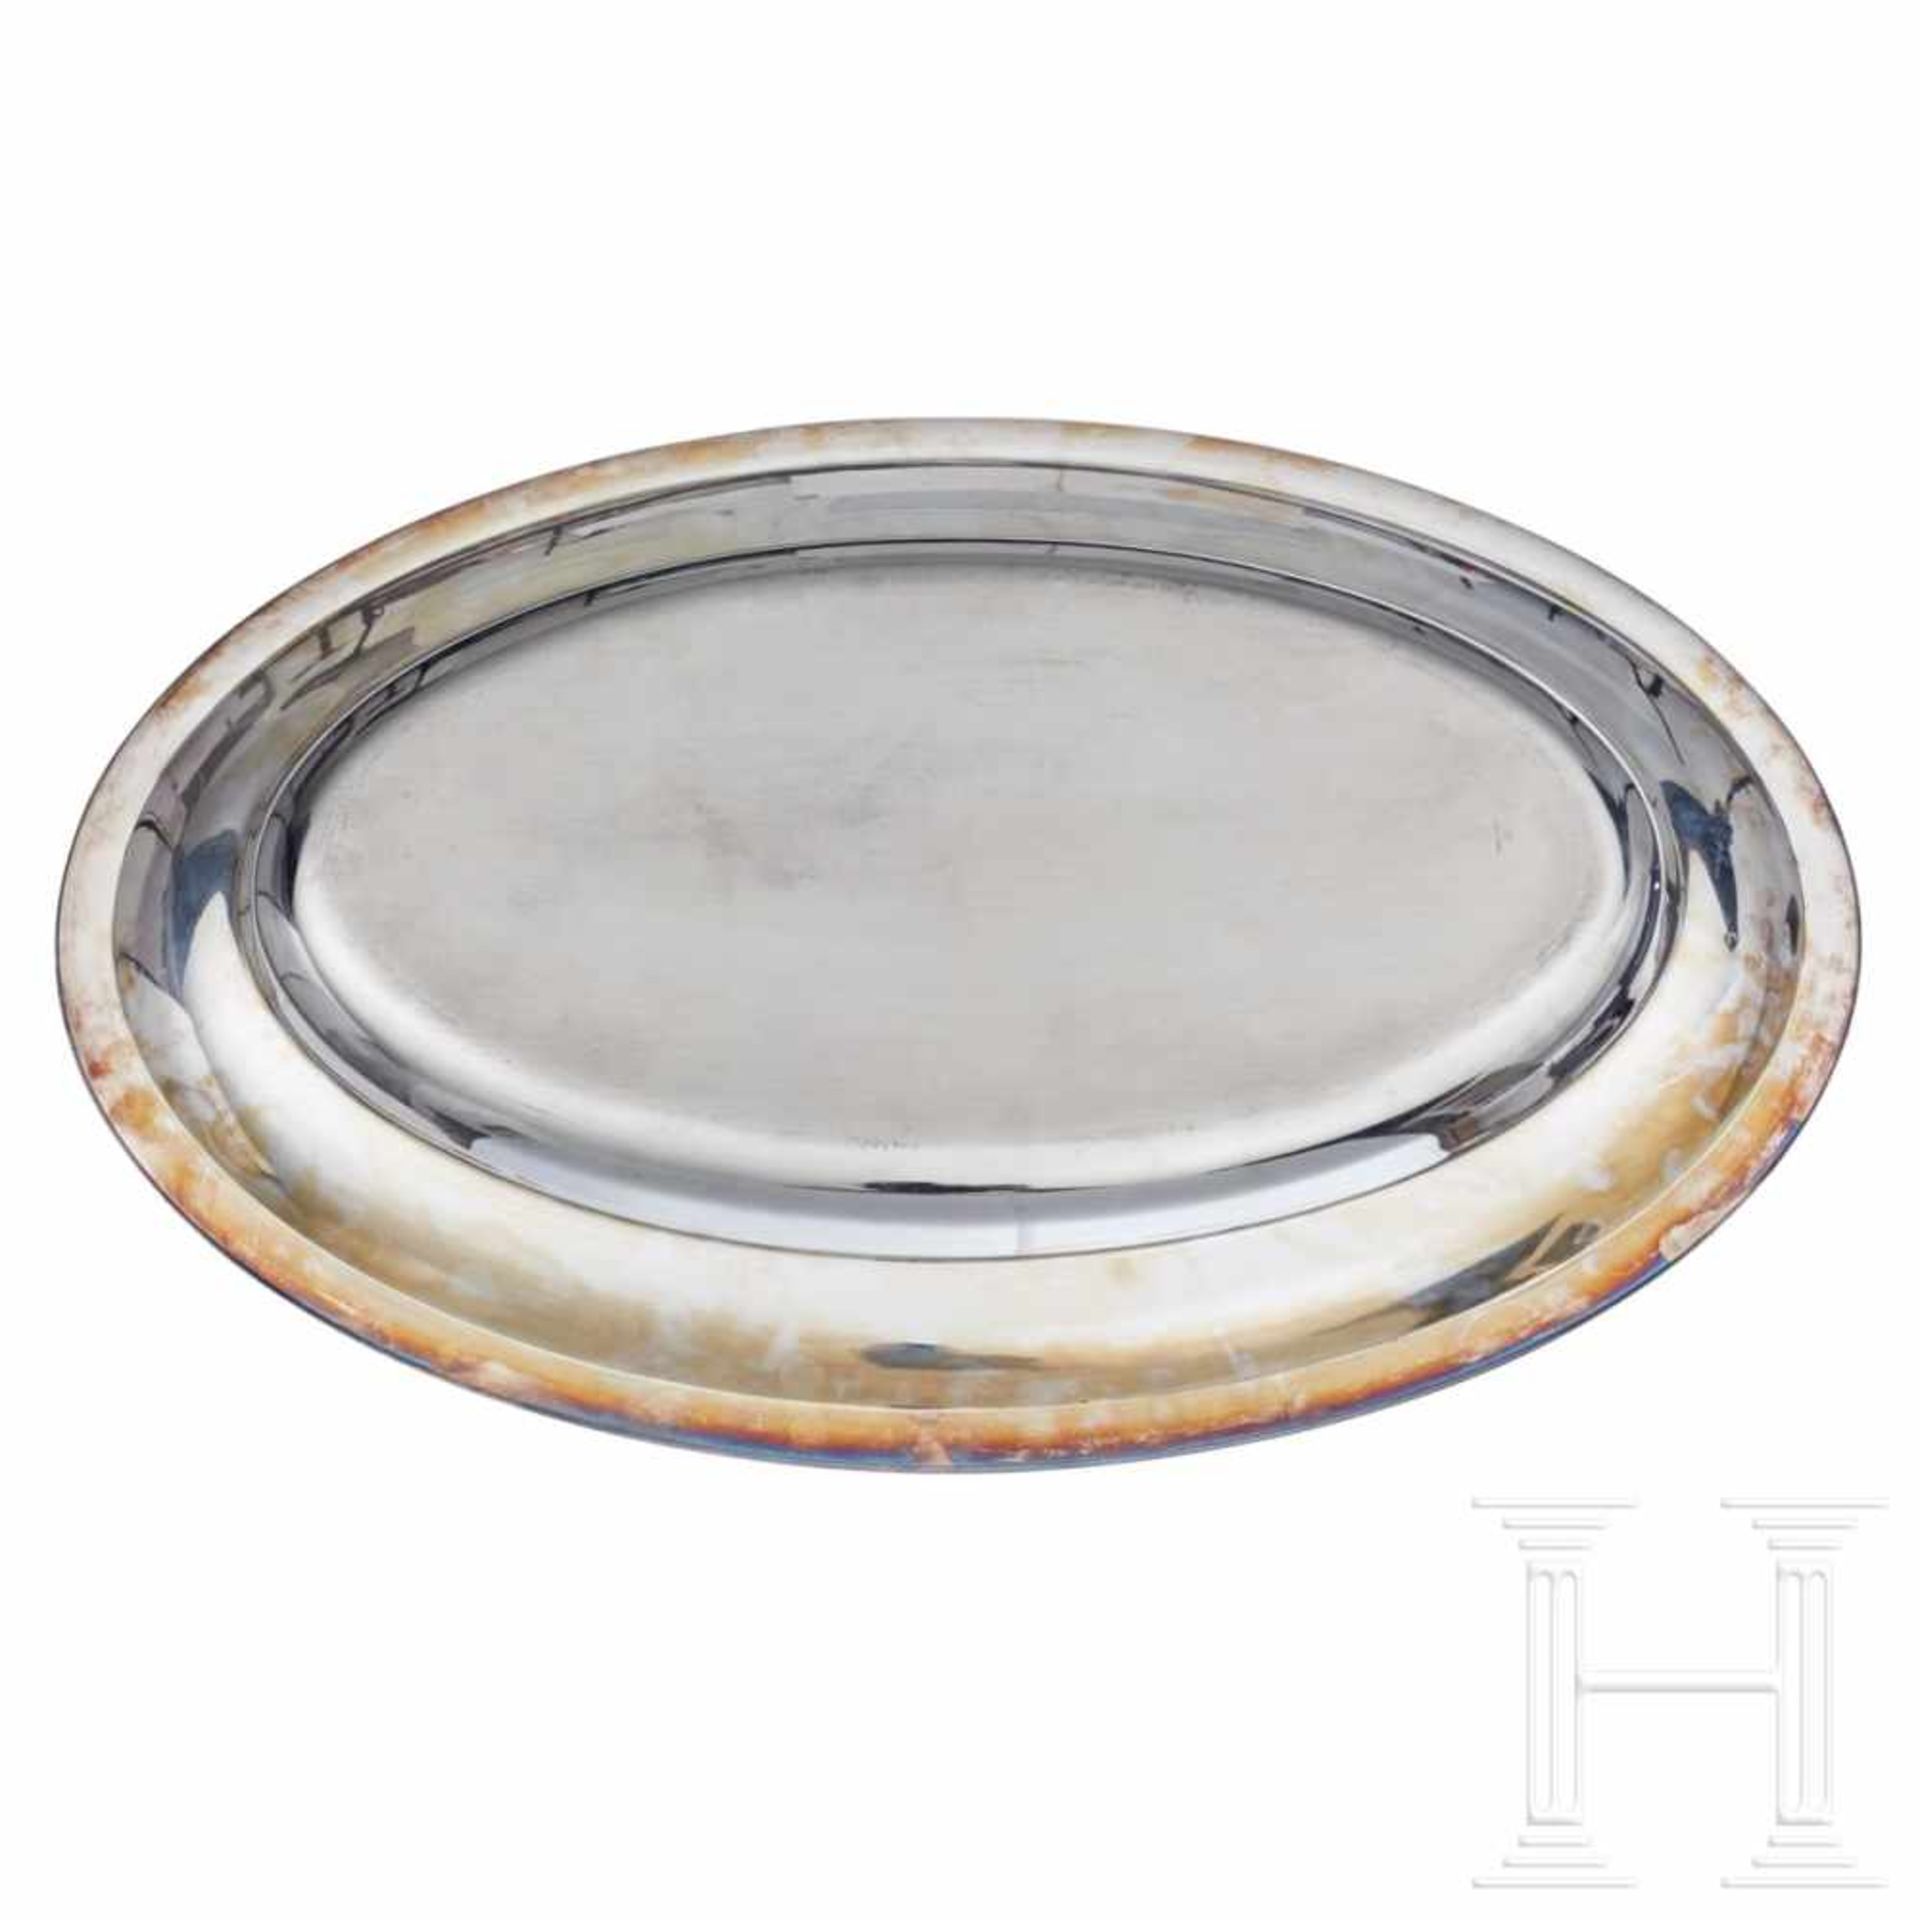 Adolf Hitler – a Large Oval Serving Tray from his Personal Silver Servicelarge, oval tray with - Bild 2 aus 5